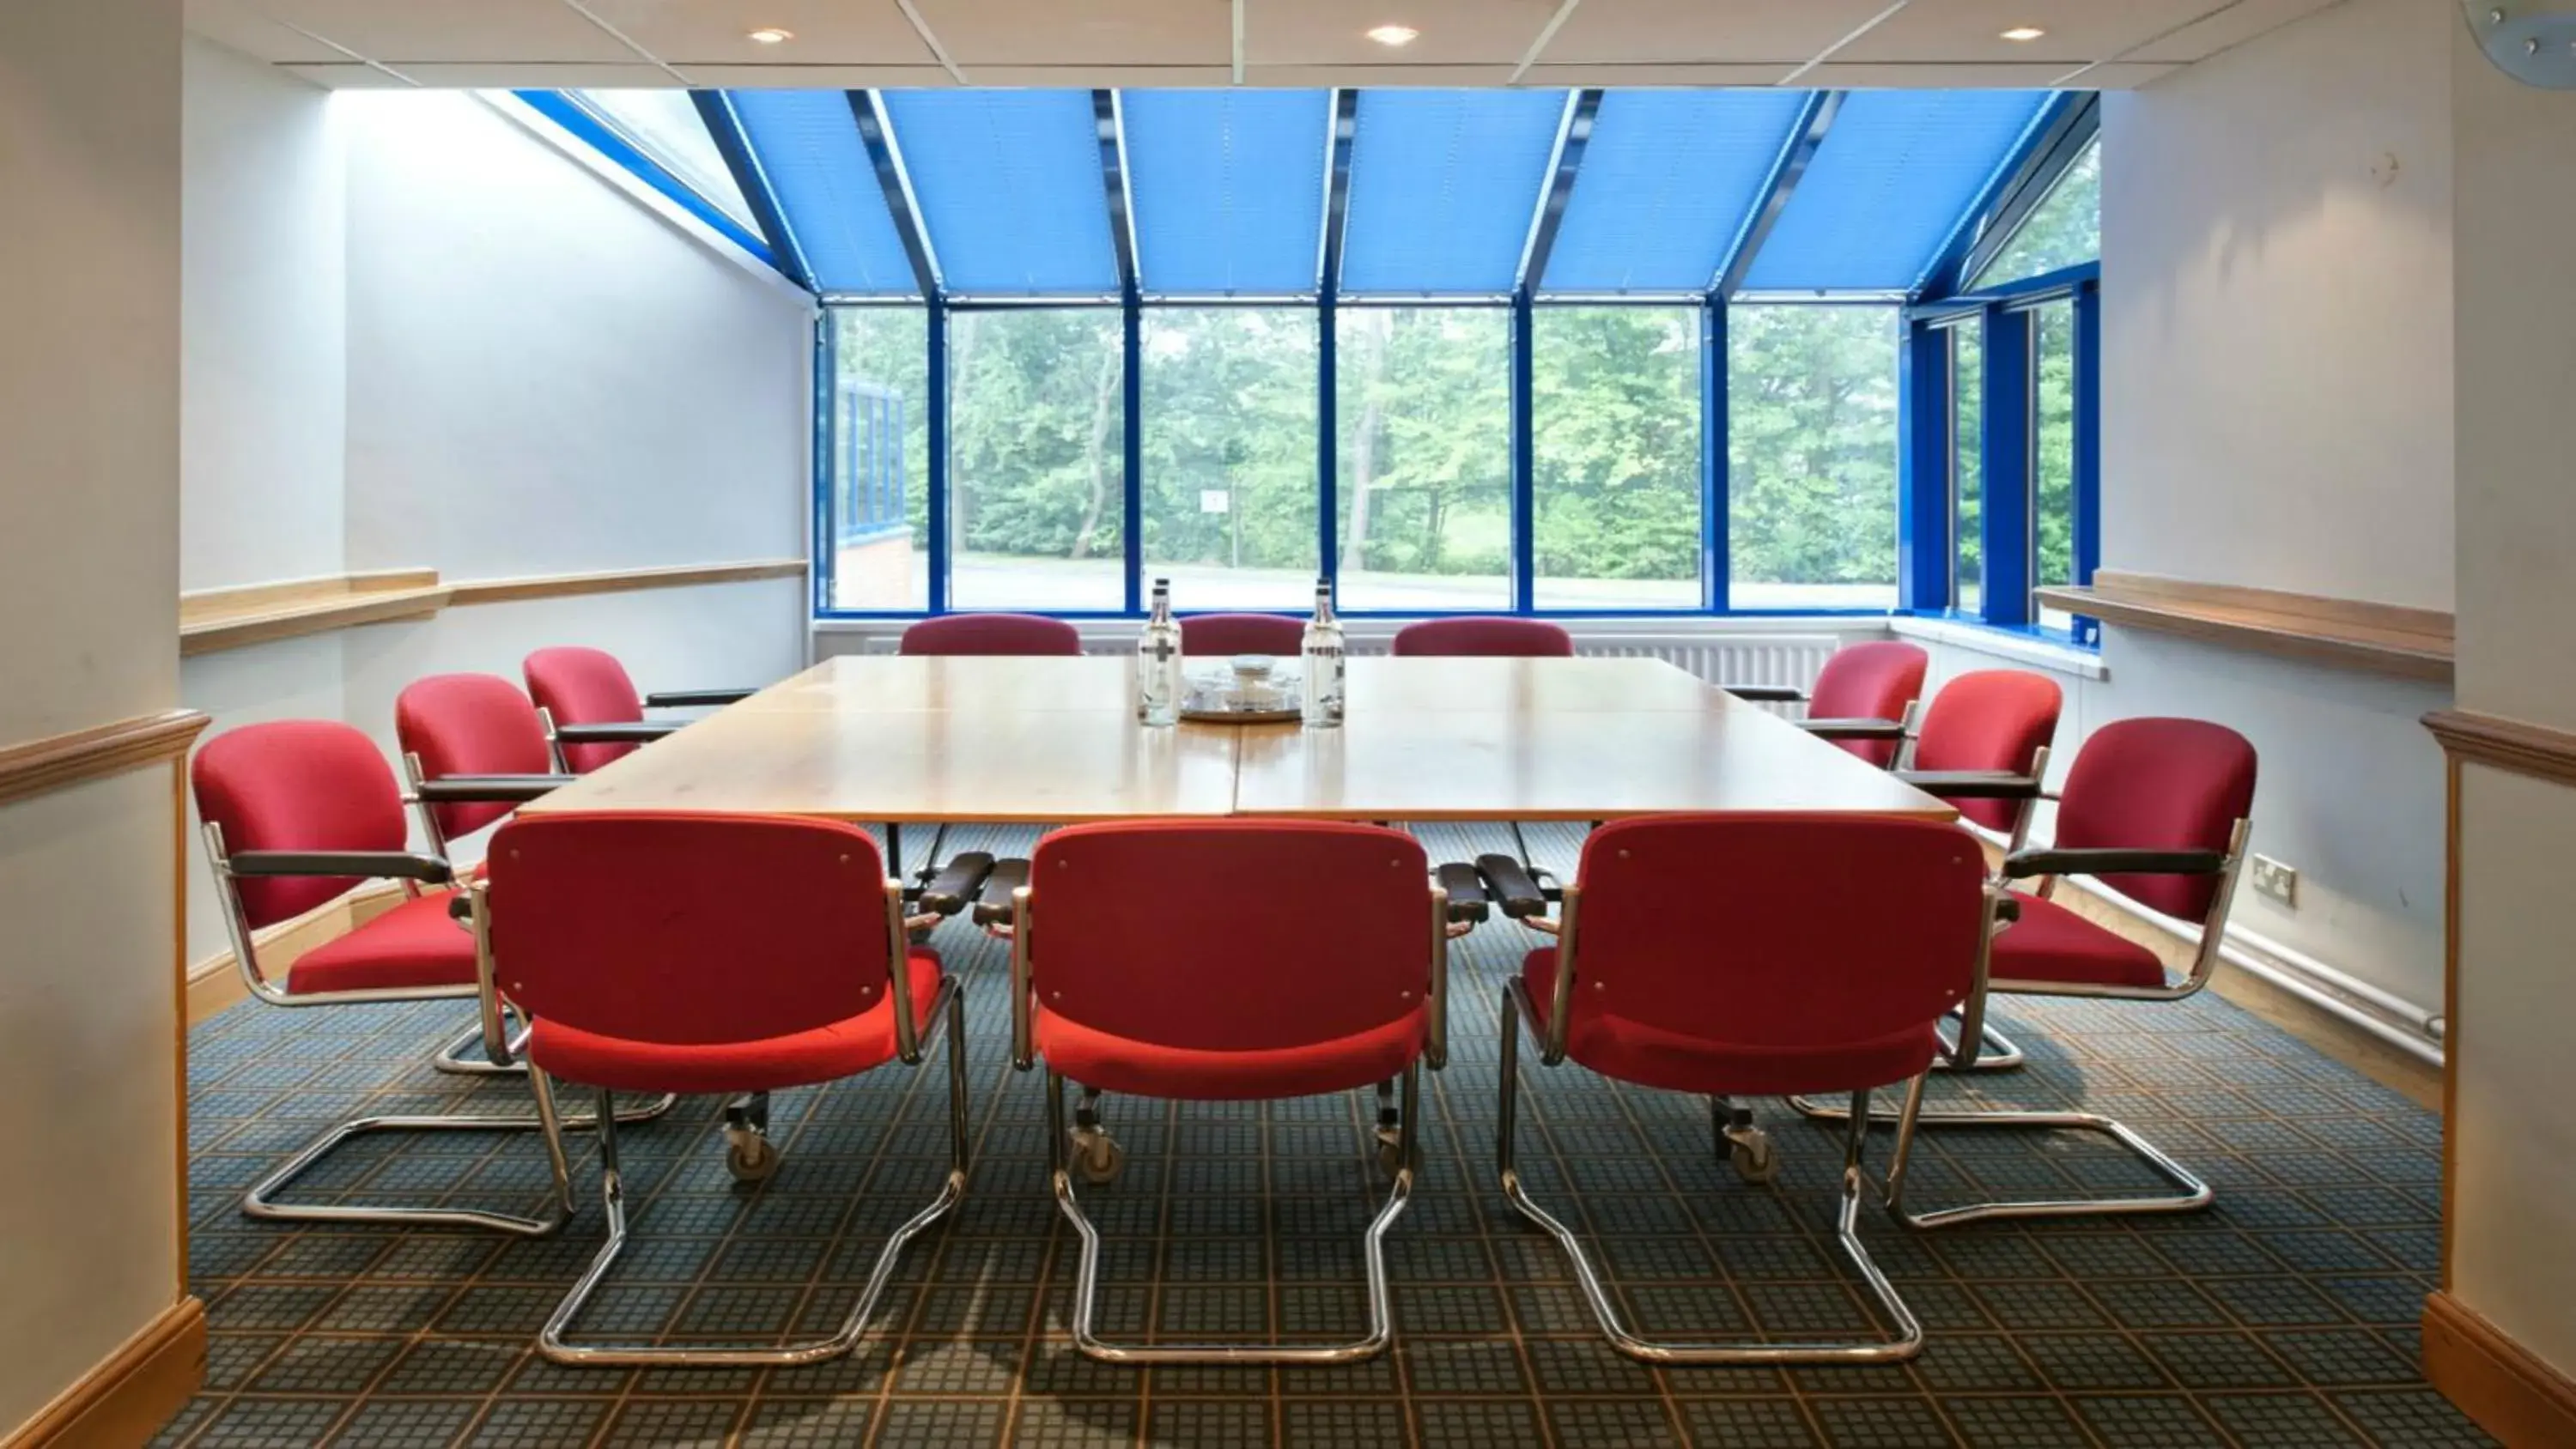 Meeting/conference room in Holiday Inn Warrington